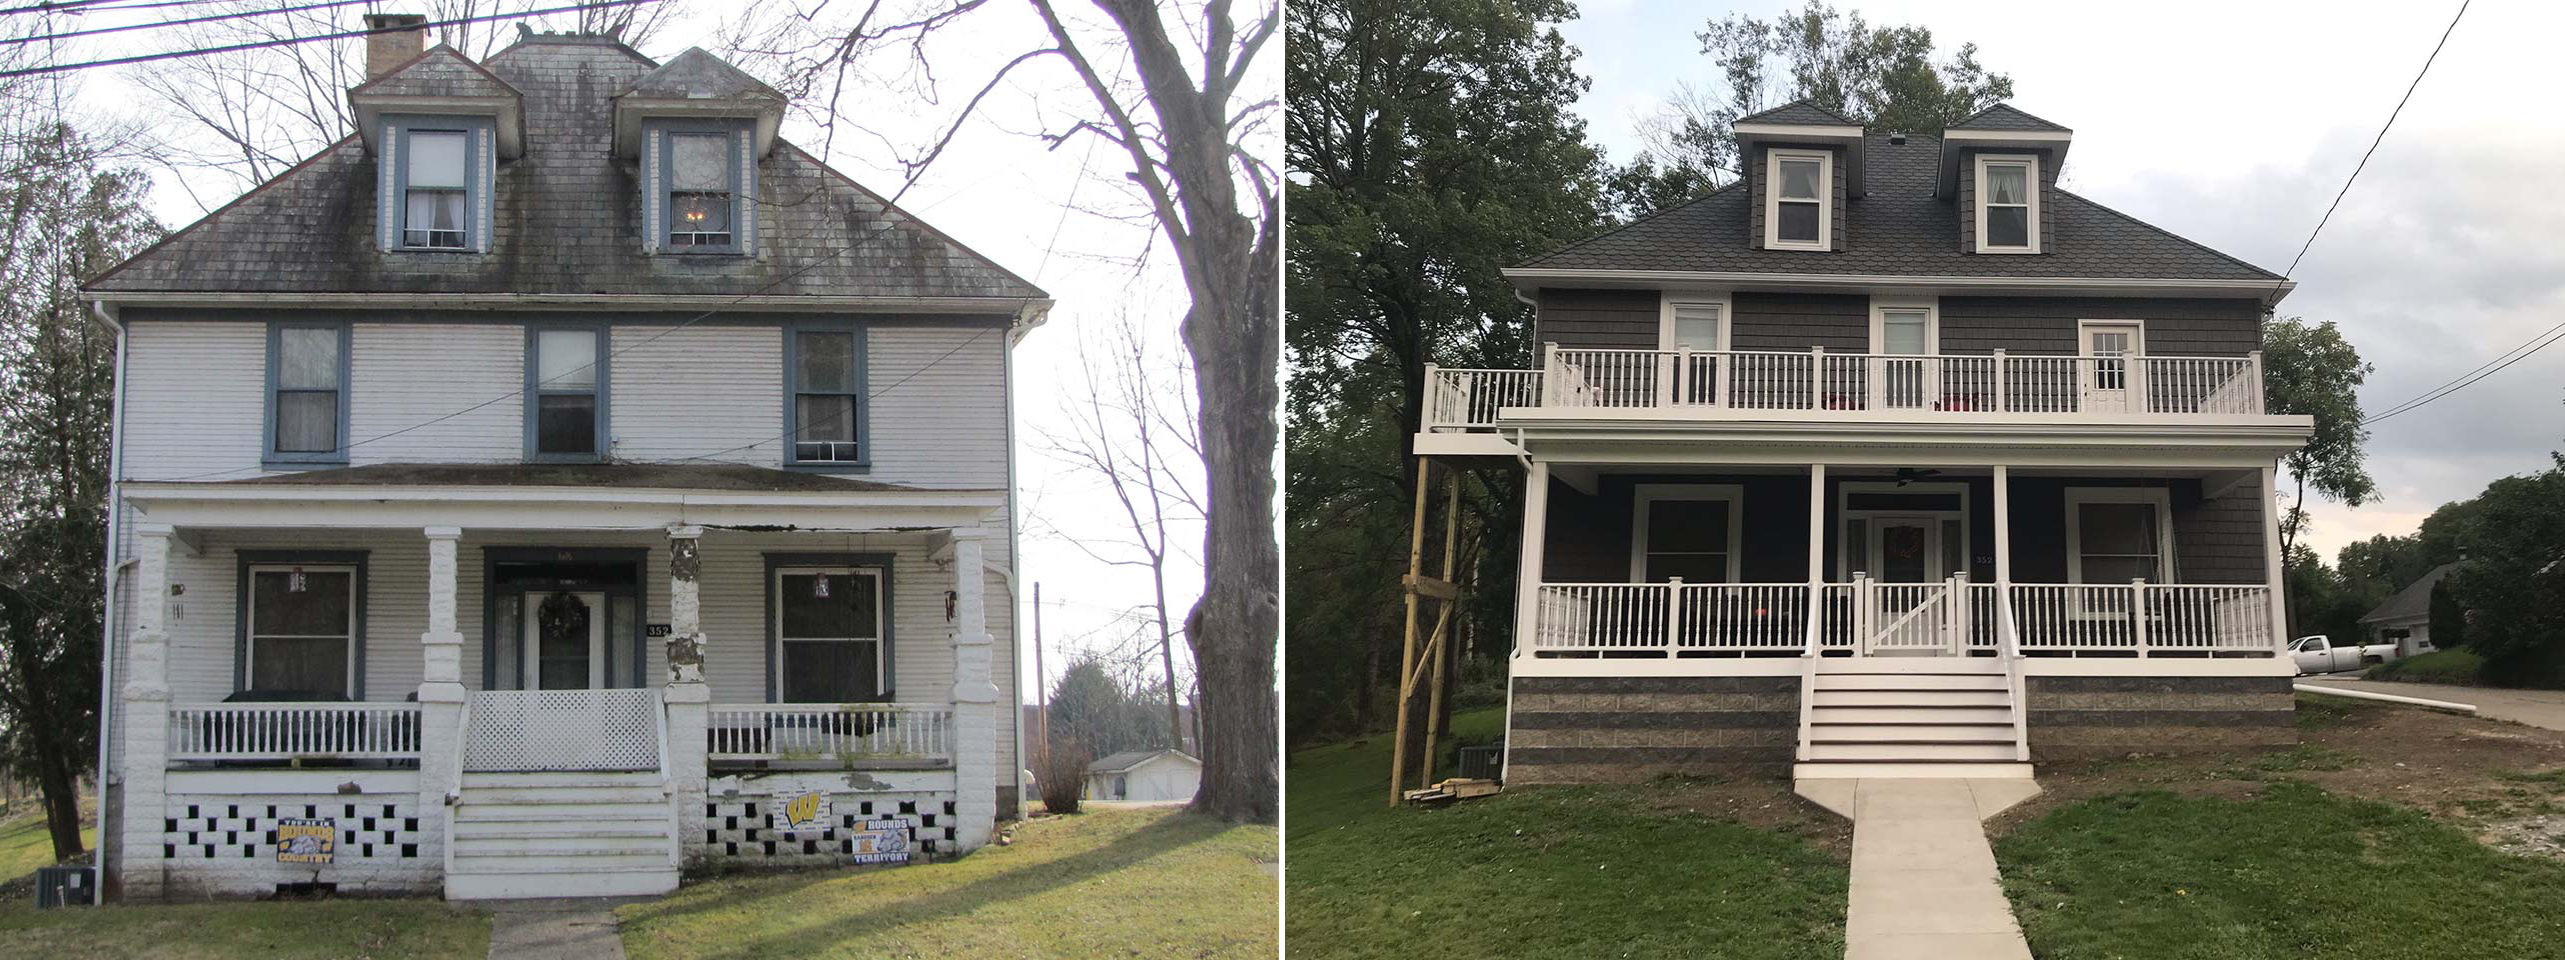 Before and After Photos of House